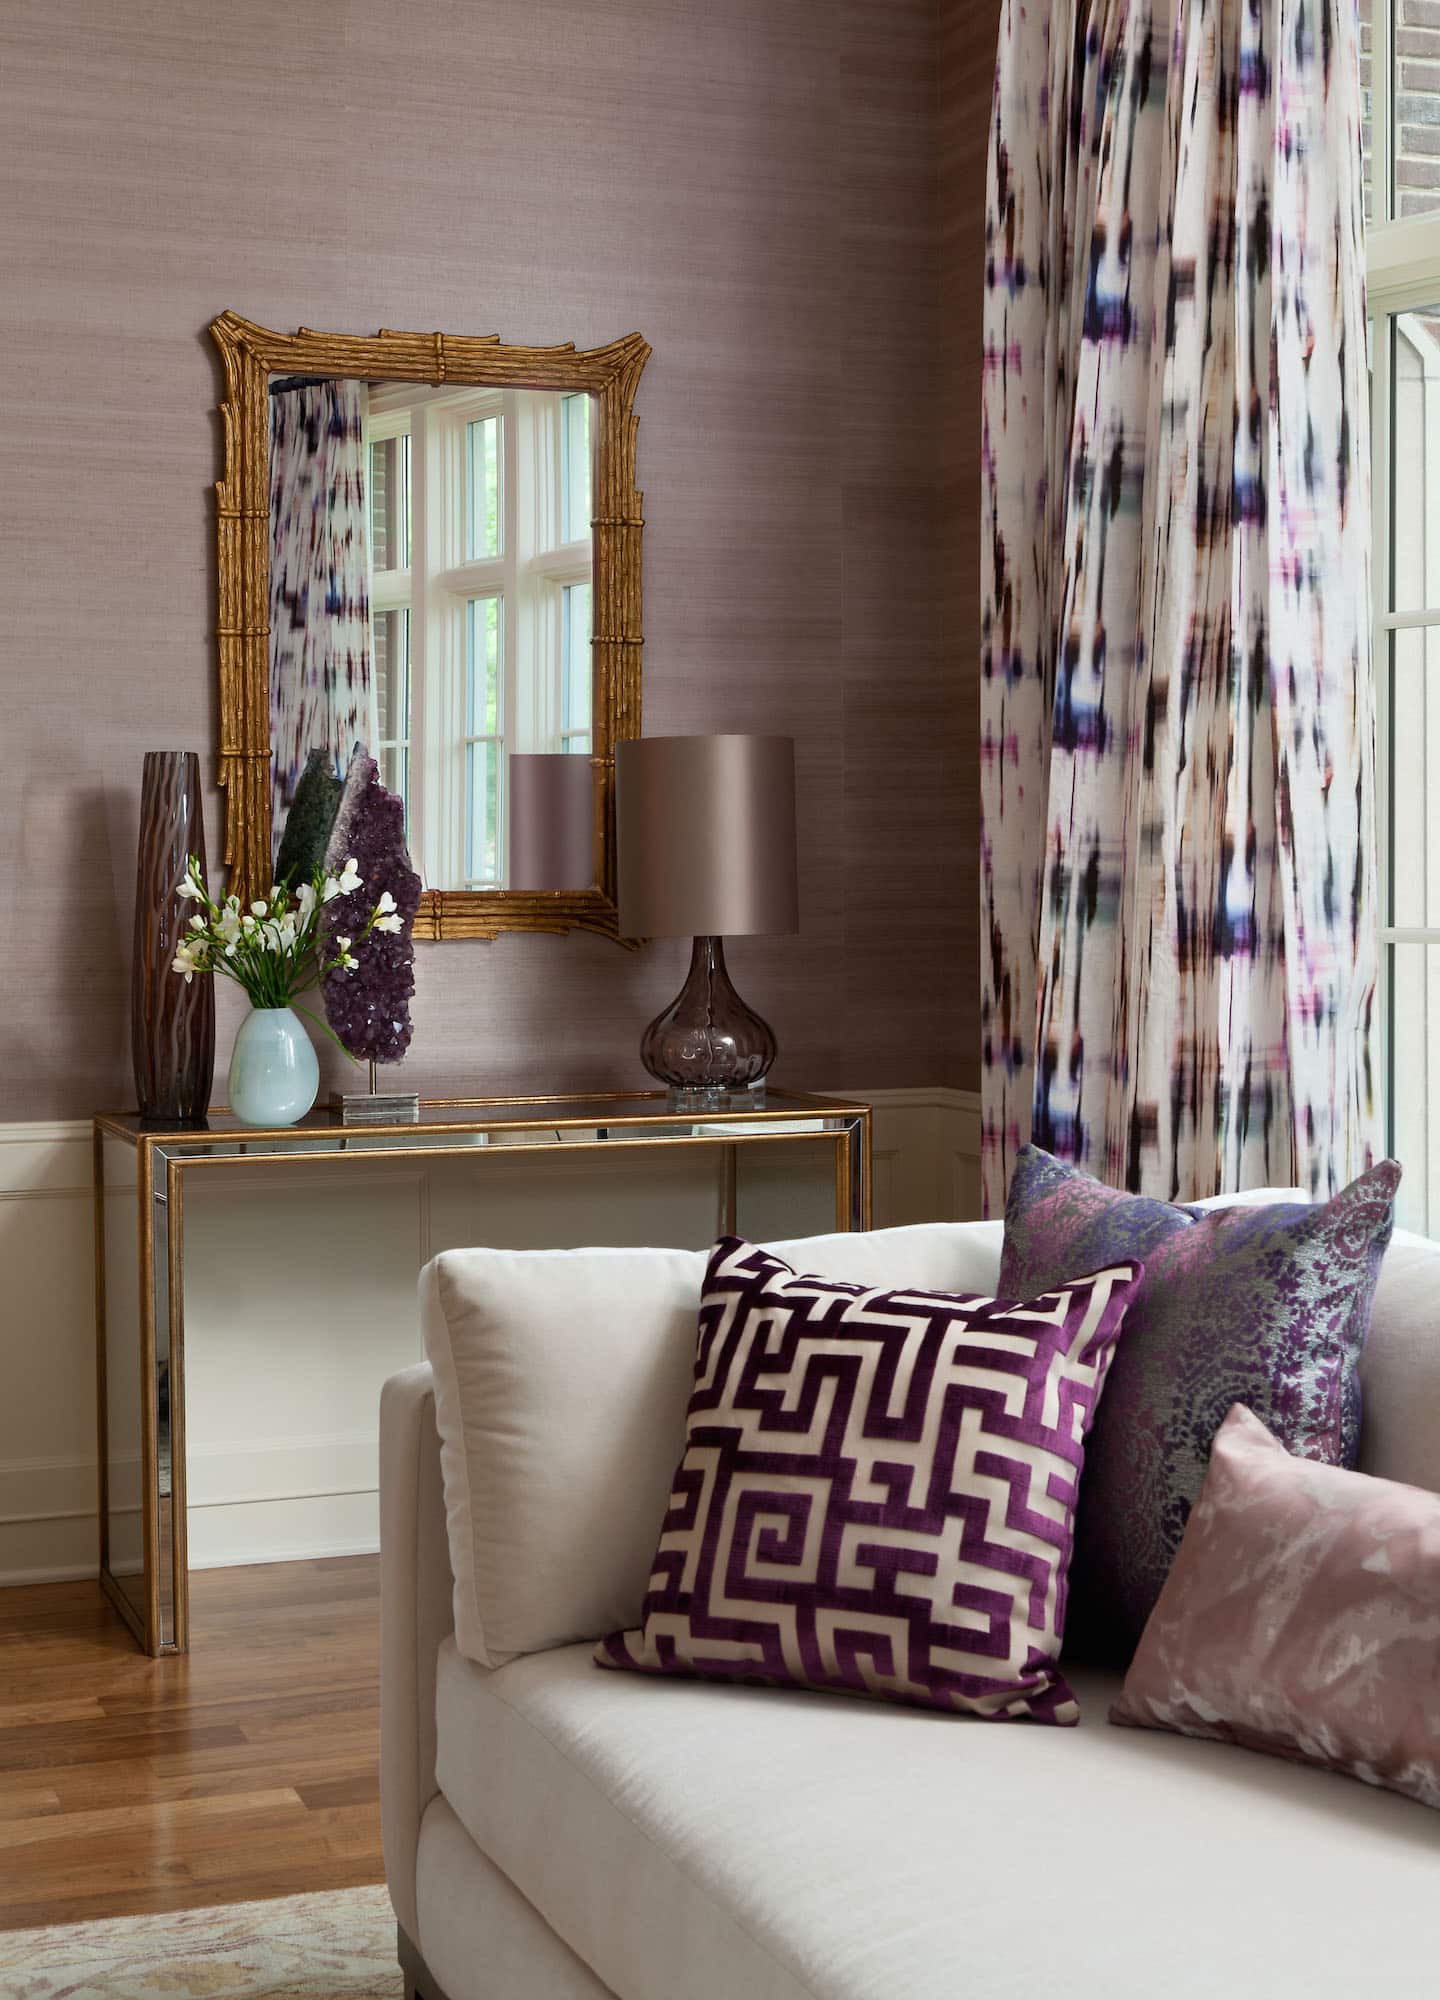 In a living room designed by Andrea Schumacher, Romo’s Black Edition Cromatico drapery fabric in violet mingles with lavender grasscloth wallpaper from Kneedler Fauchère and throw pillows in various fabrics. Photo by Emily Minton Redfield